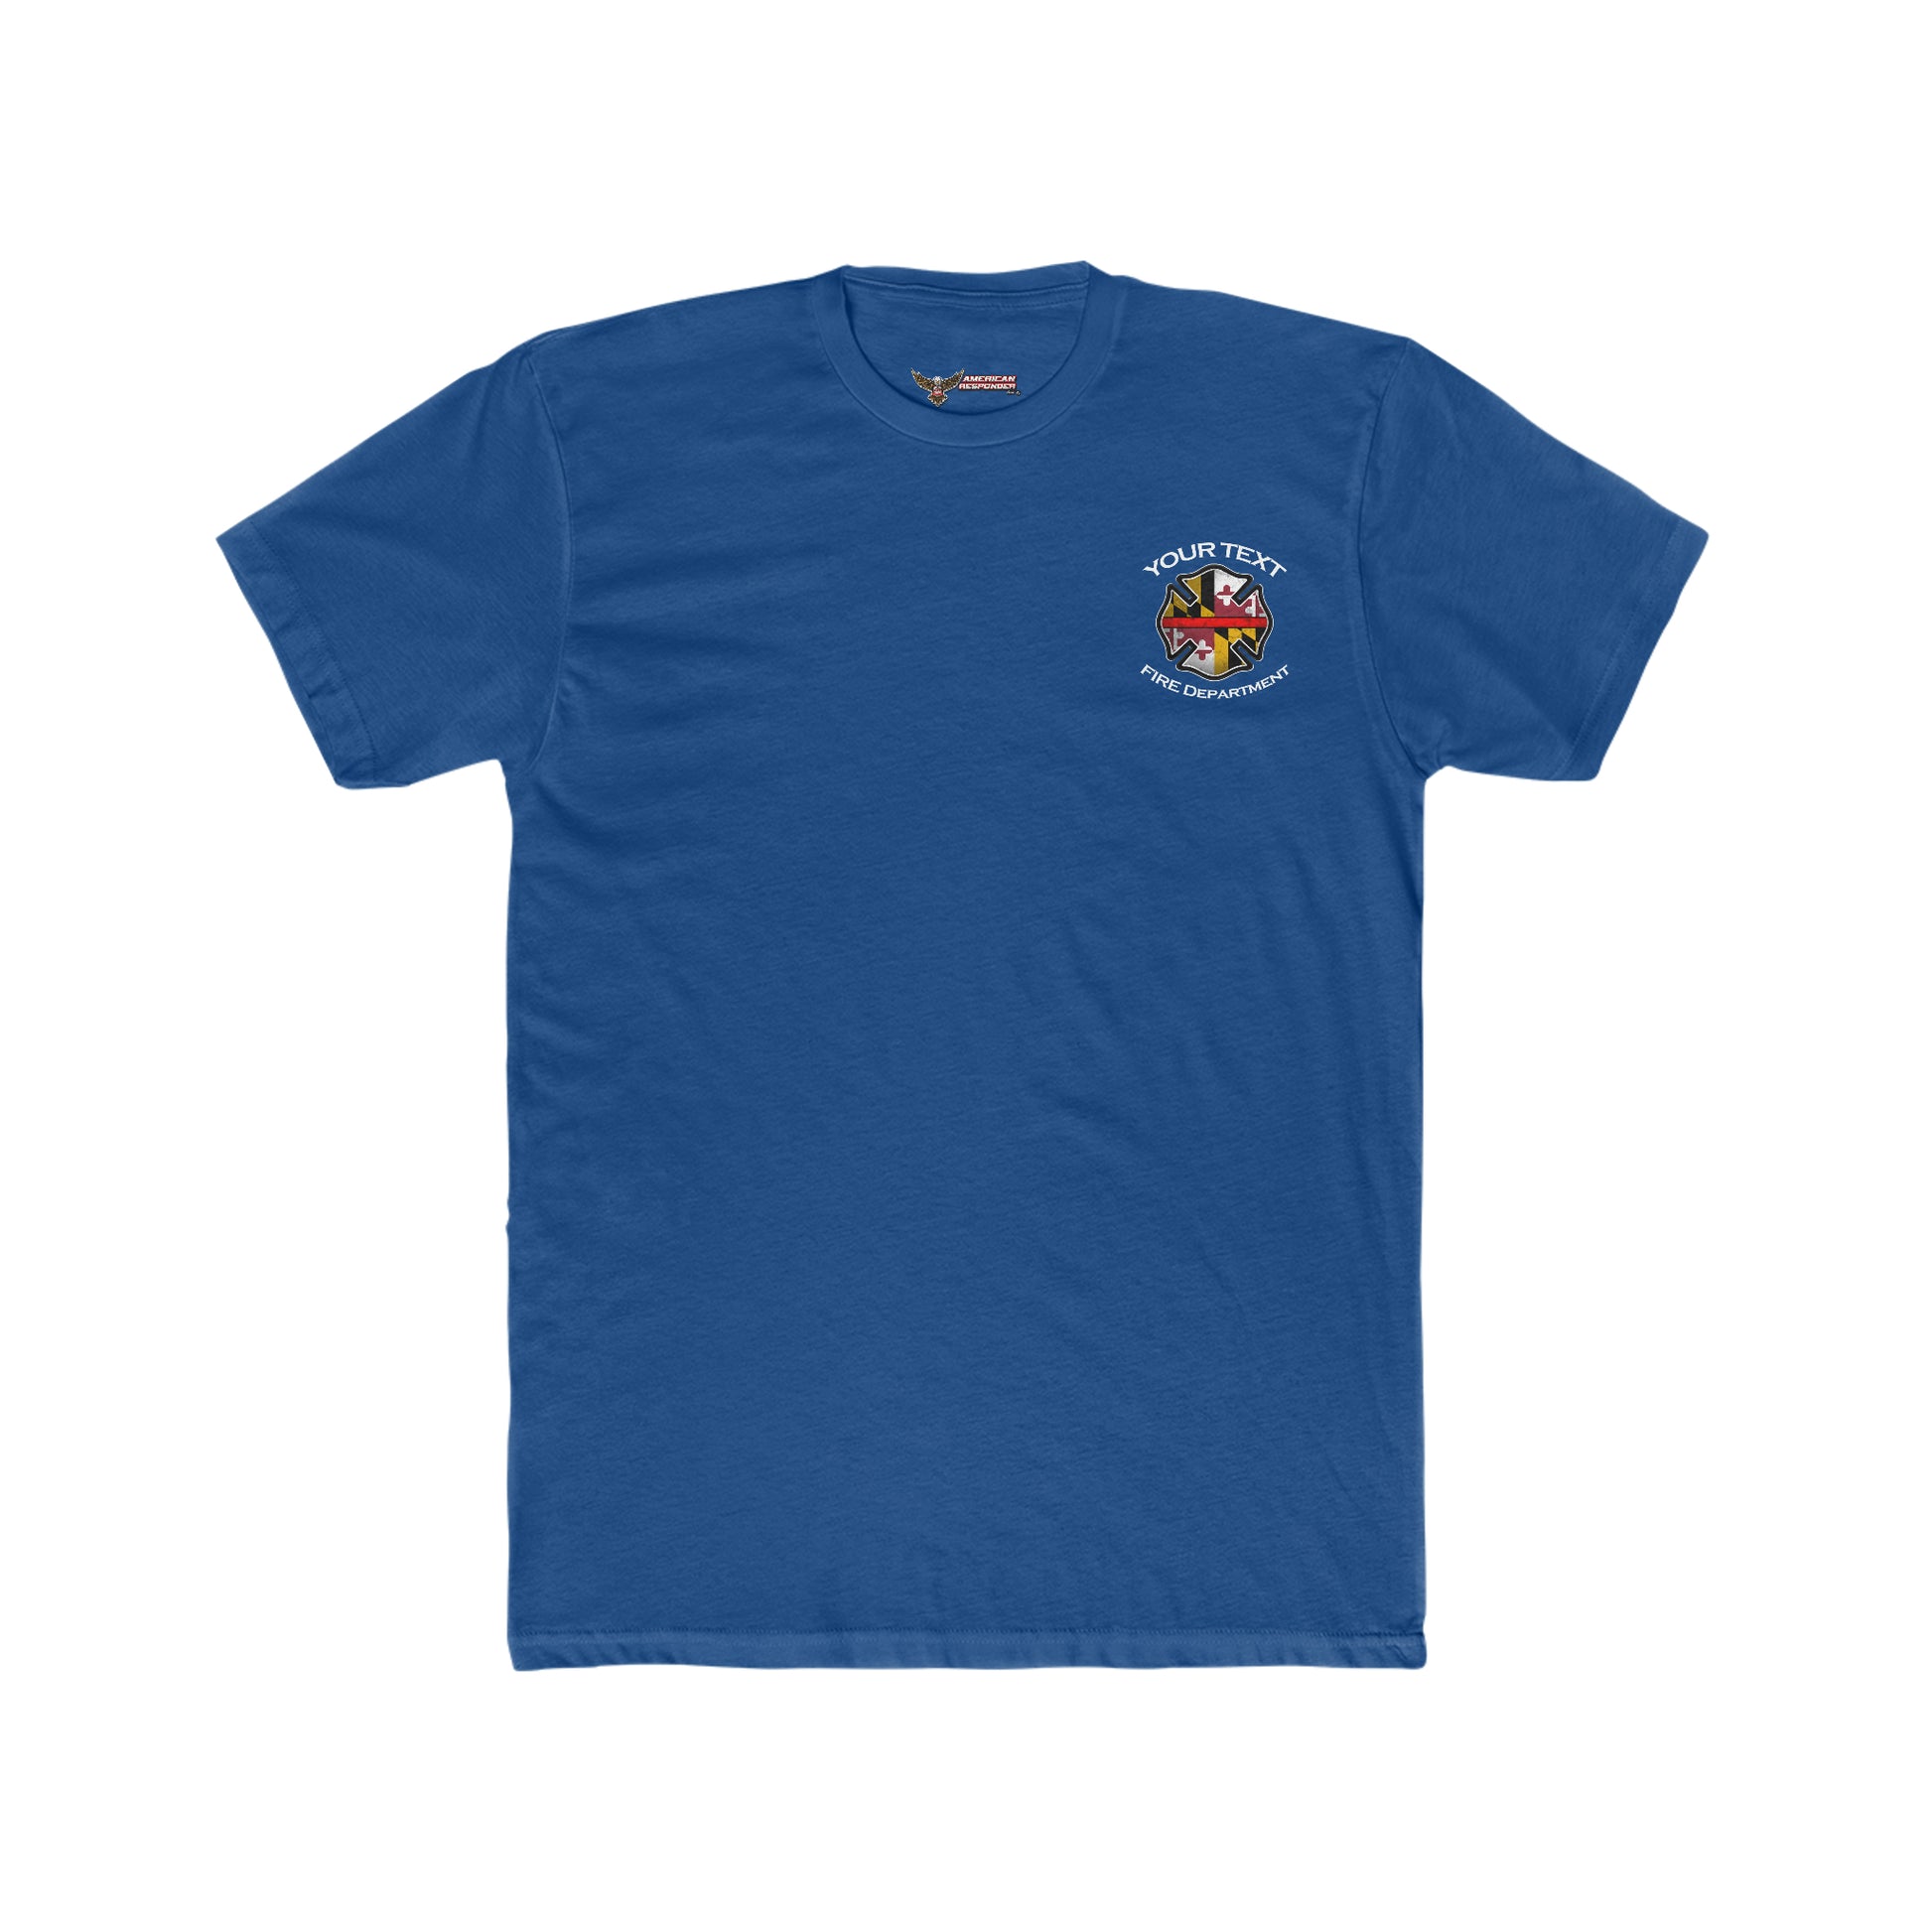 Maryland - Personalized Fire Department Shirt - American Responder Designs